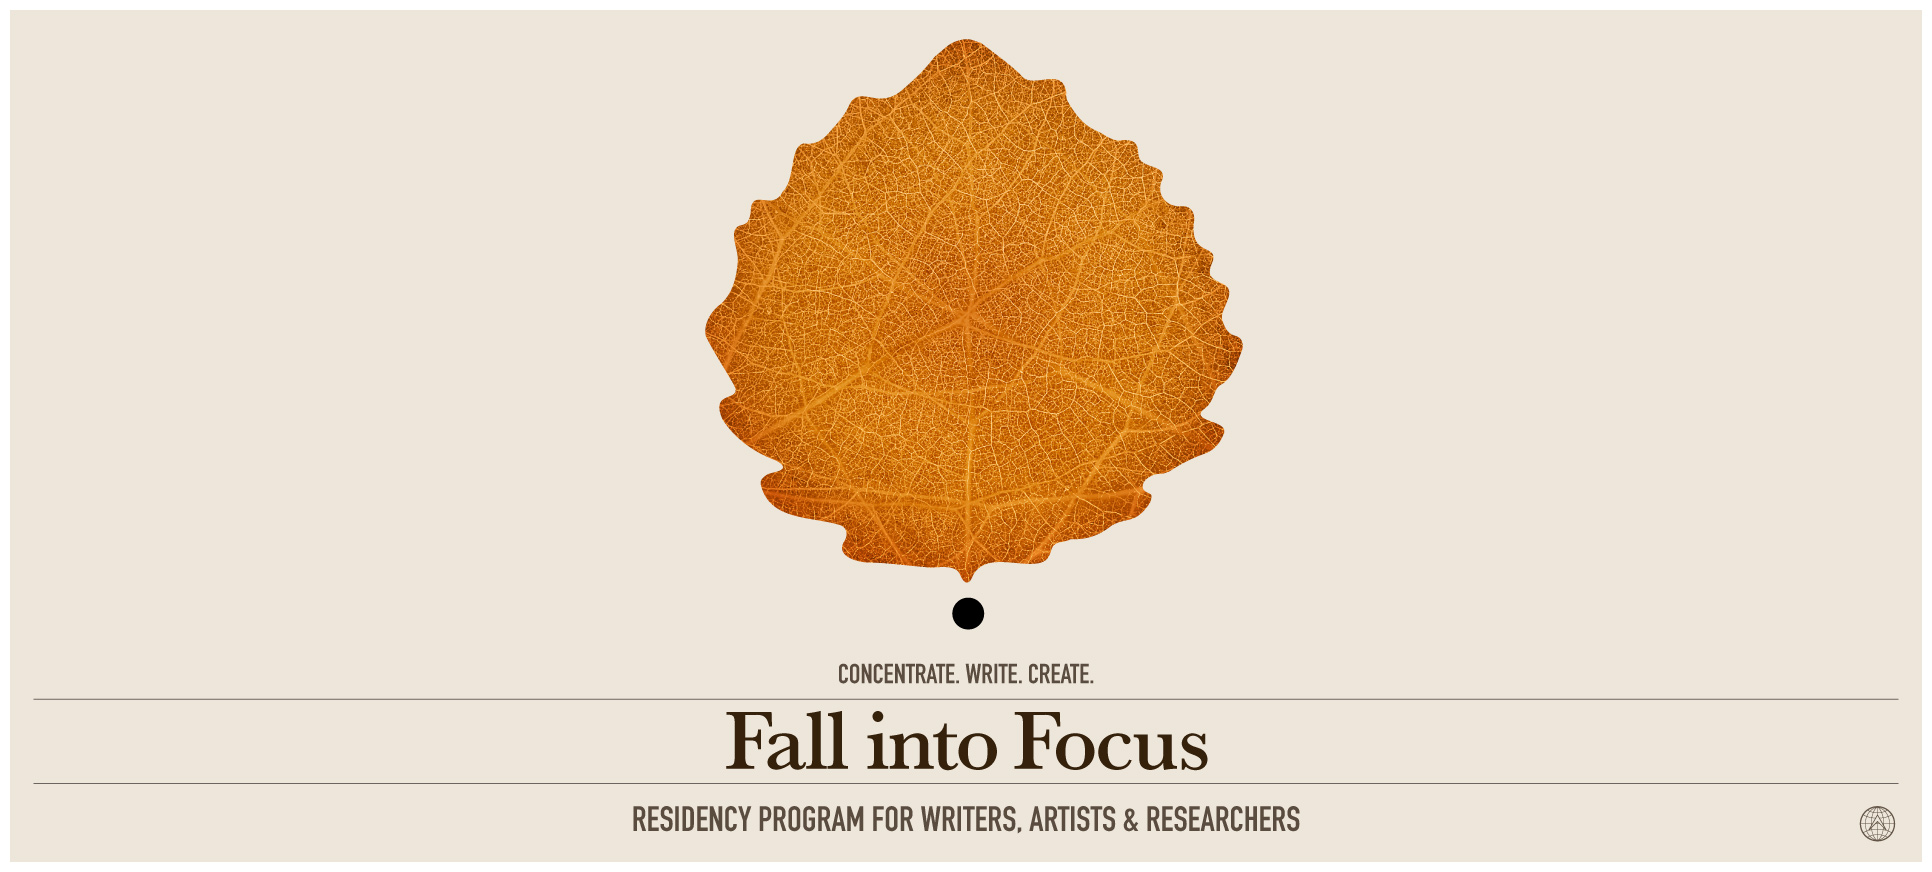 Fall into Focus residency program in Finland, Fall 2023